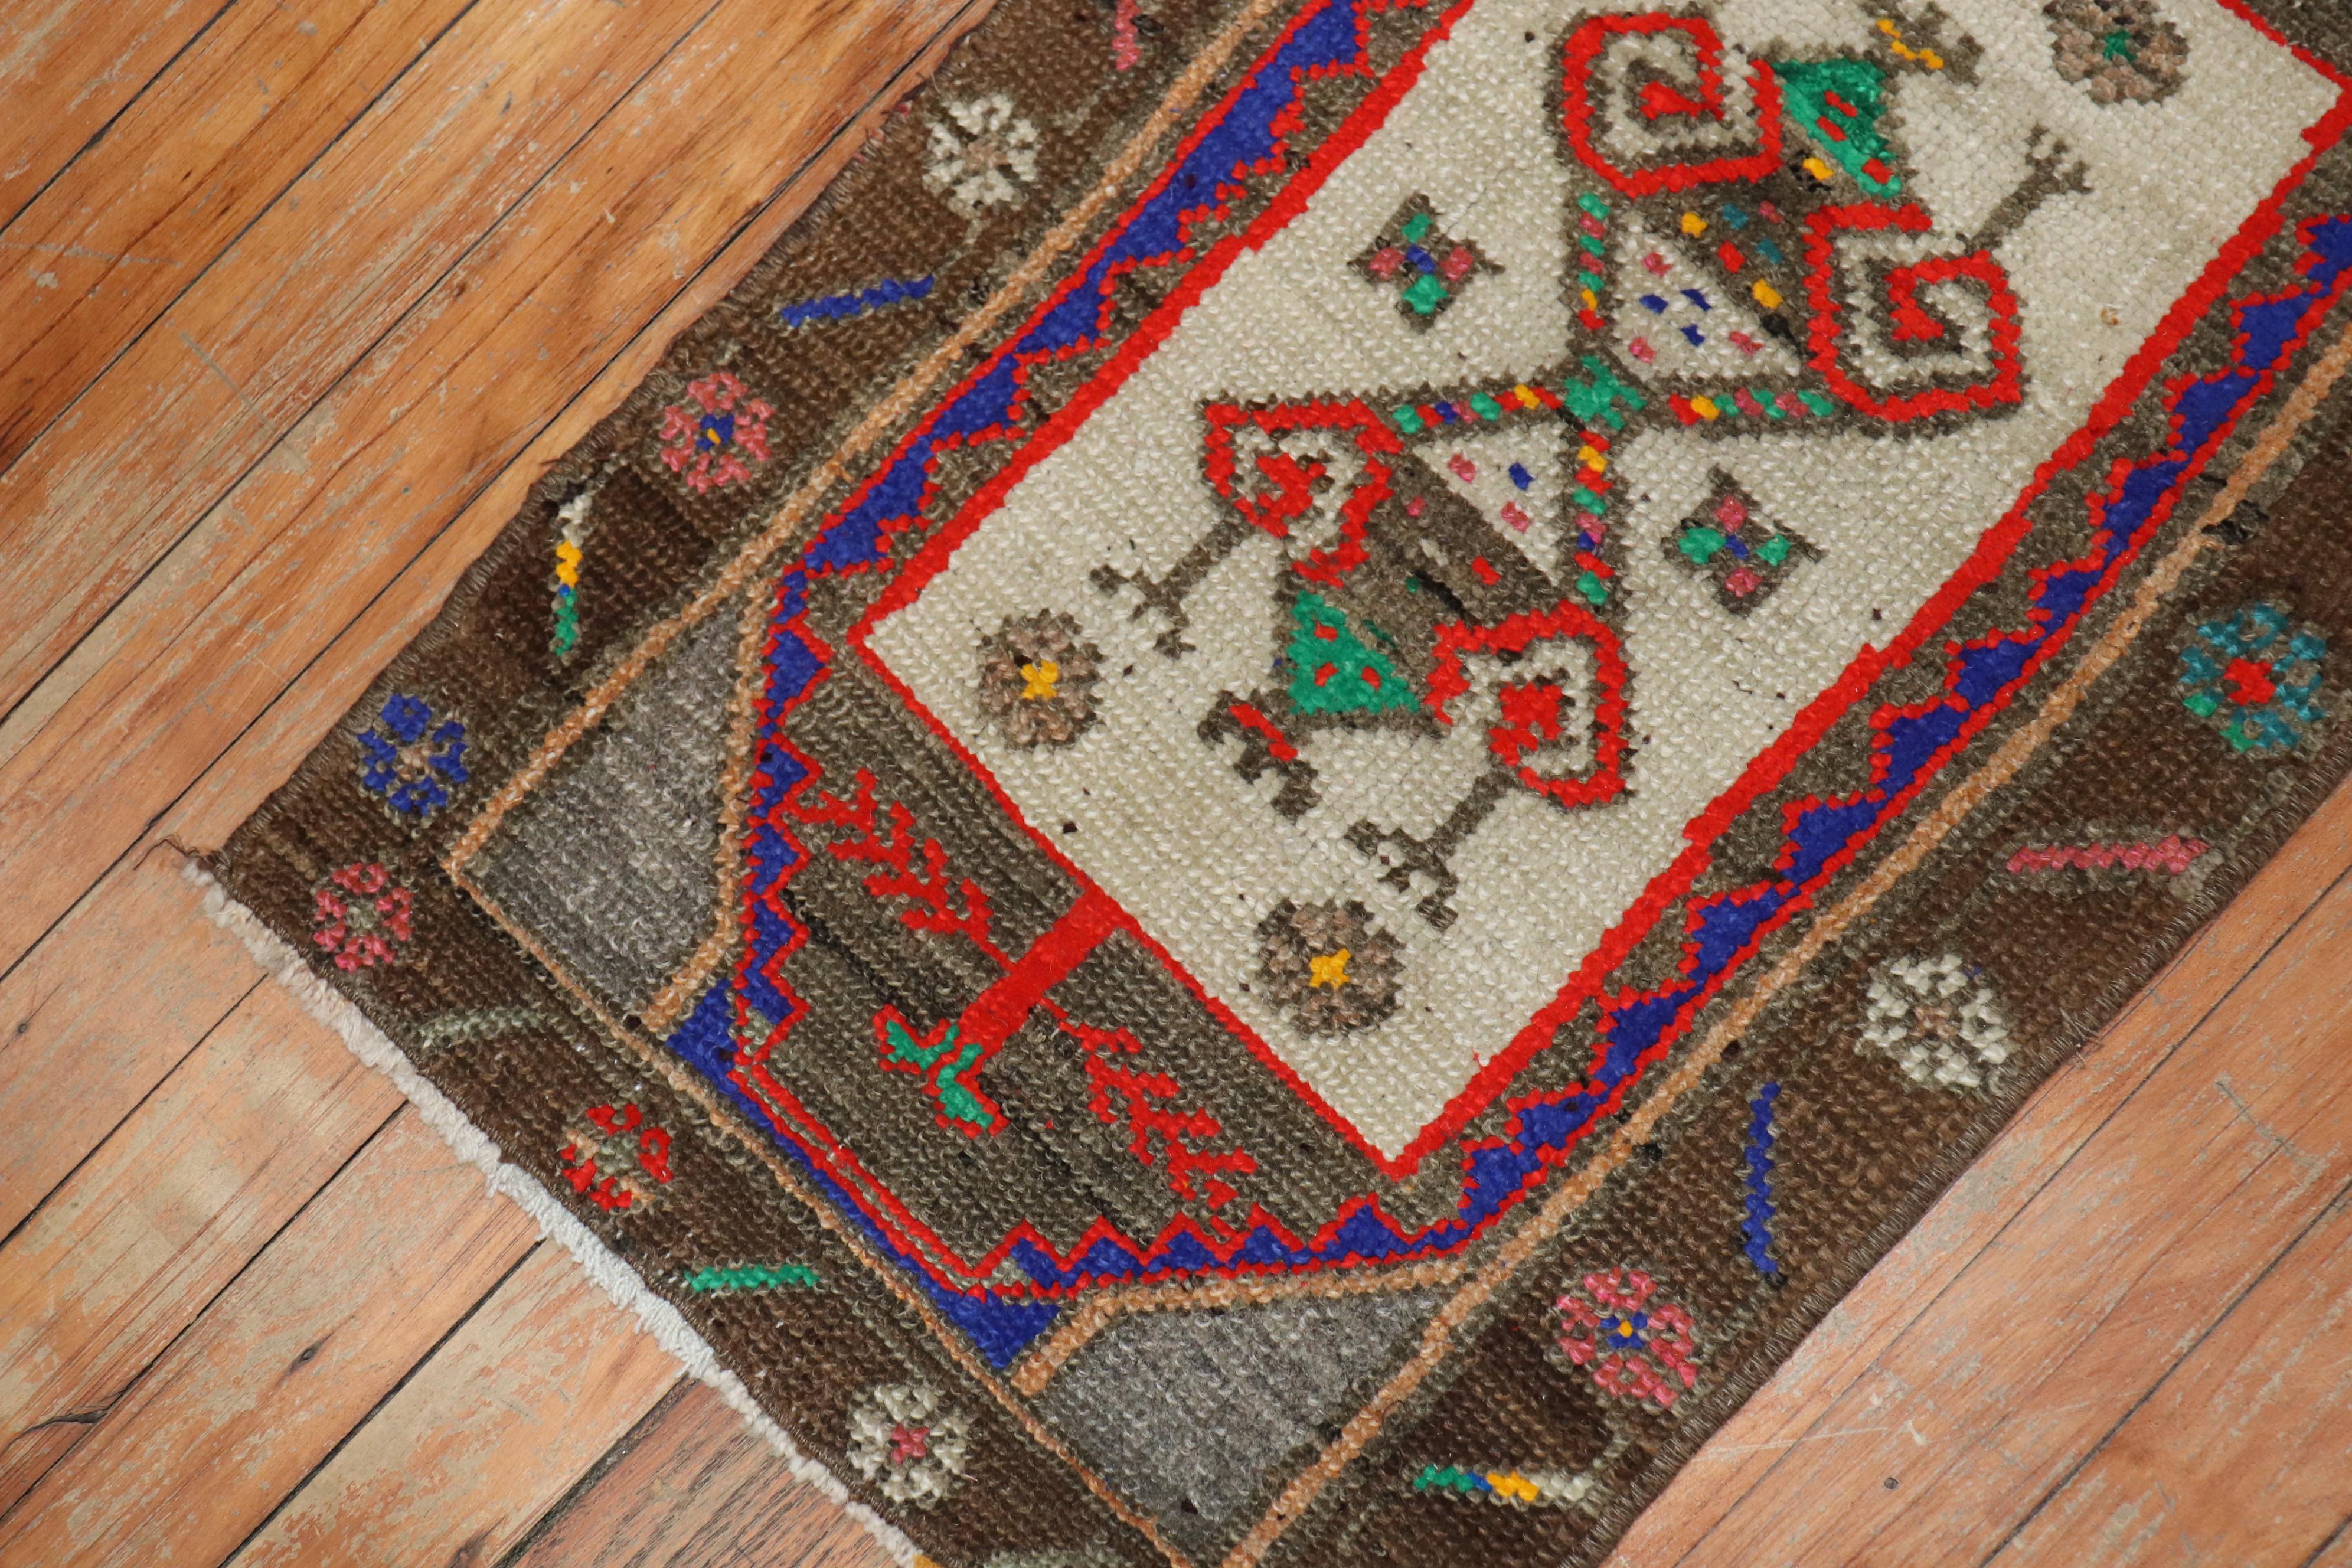 A vintage Anatolian Turkish Yastik rug mat with a chocolate brown border, cotton accents in green, pink, red, yellow and purple-blue

Measures: 1'5” x 2'7”.